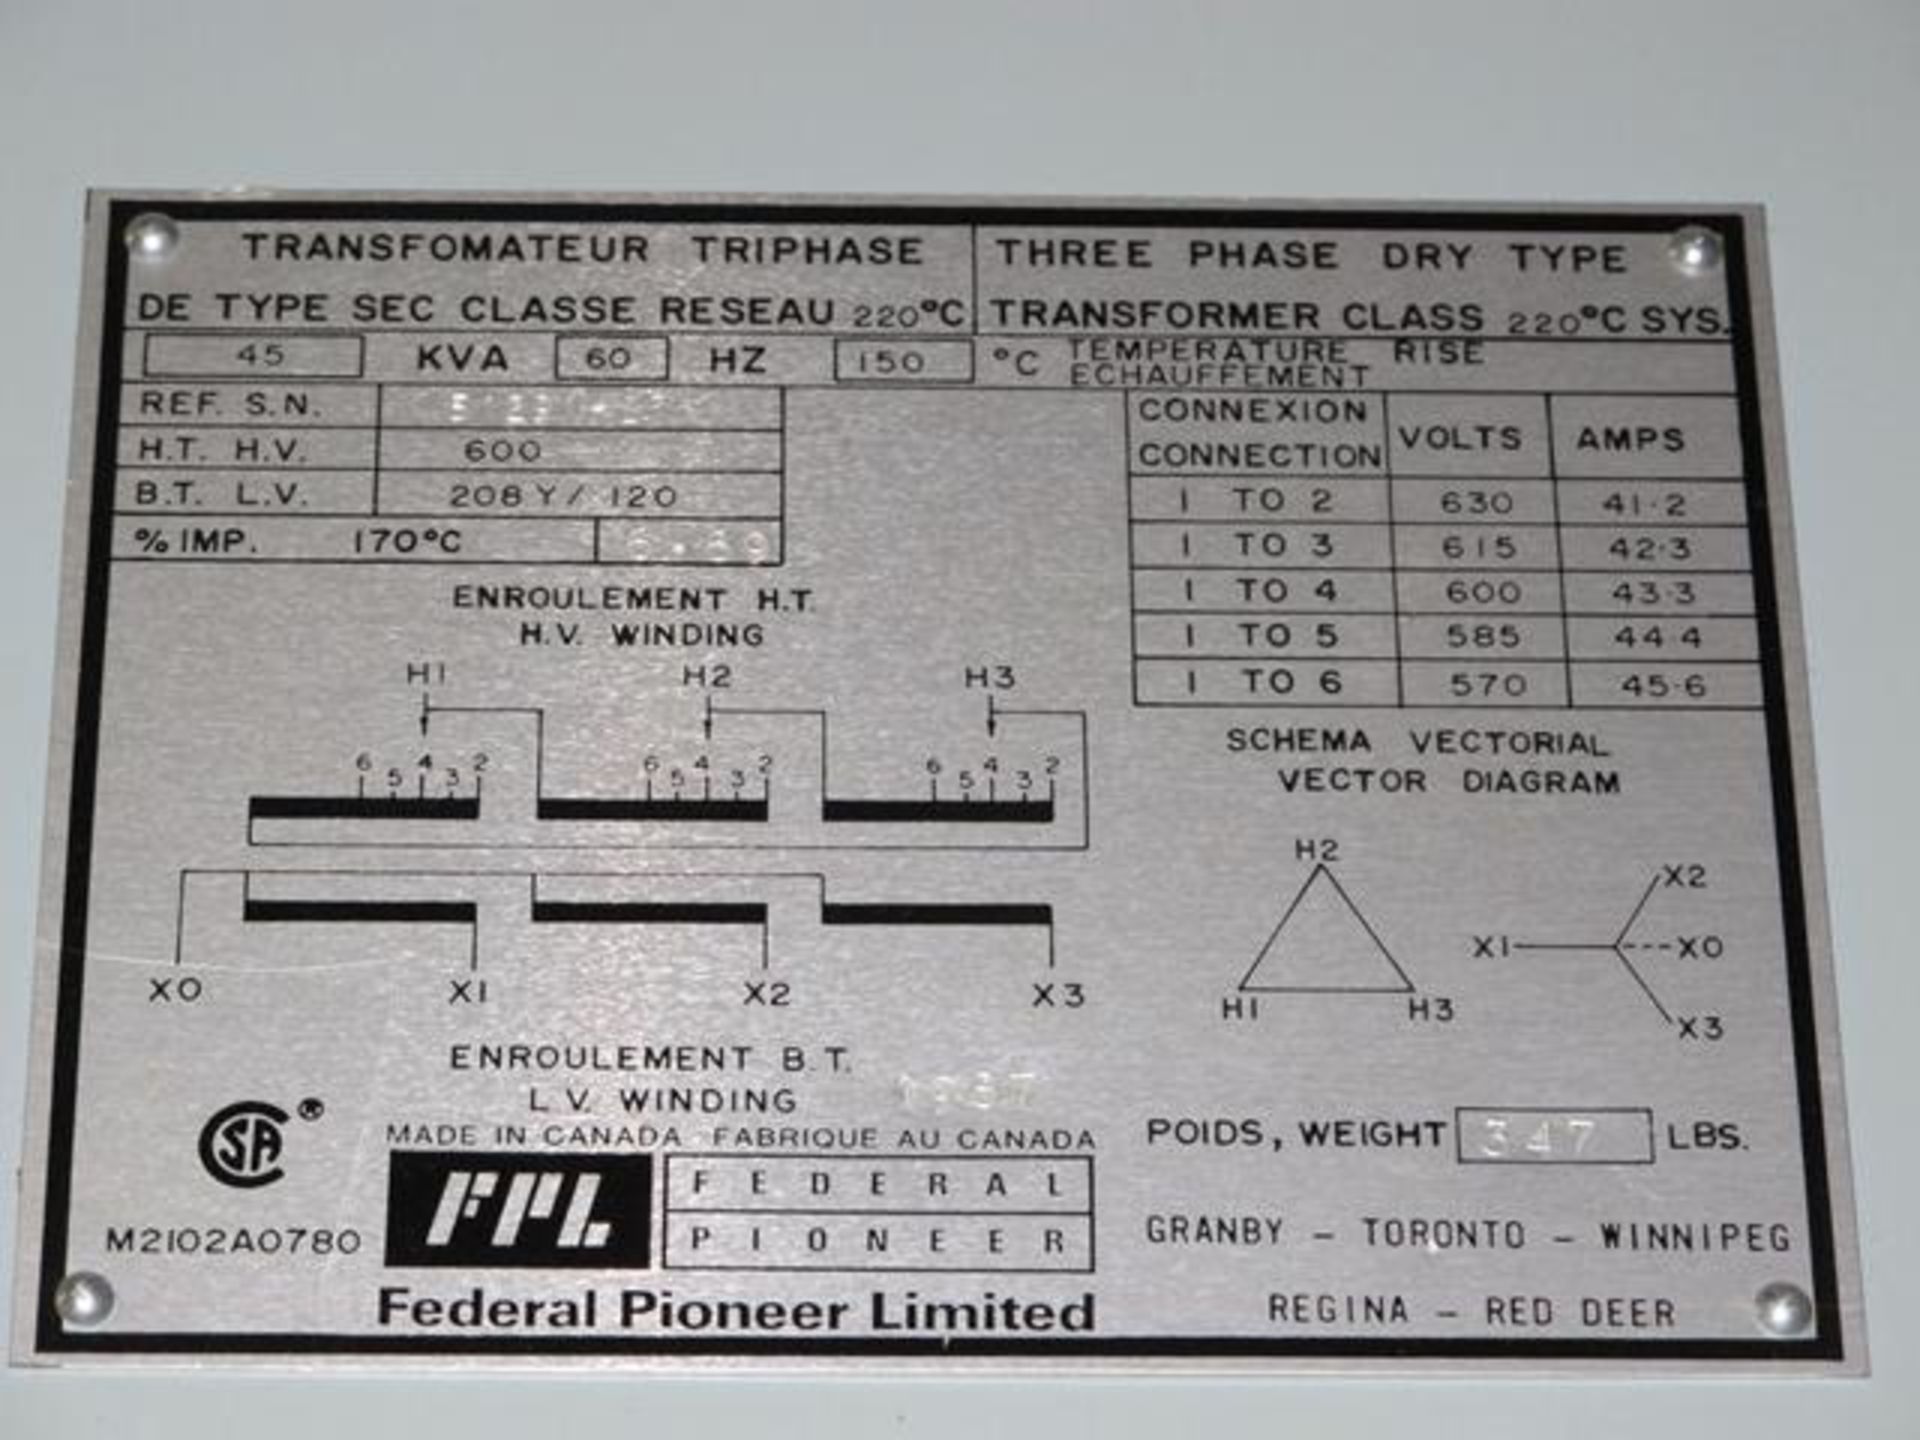 FEDERAL PIONEER TRANSFORMER, 600V TO 220V, 45 KVA, USED WITH LOT 26, (L2) - Image 3 of 3